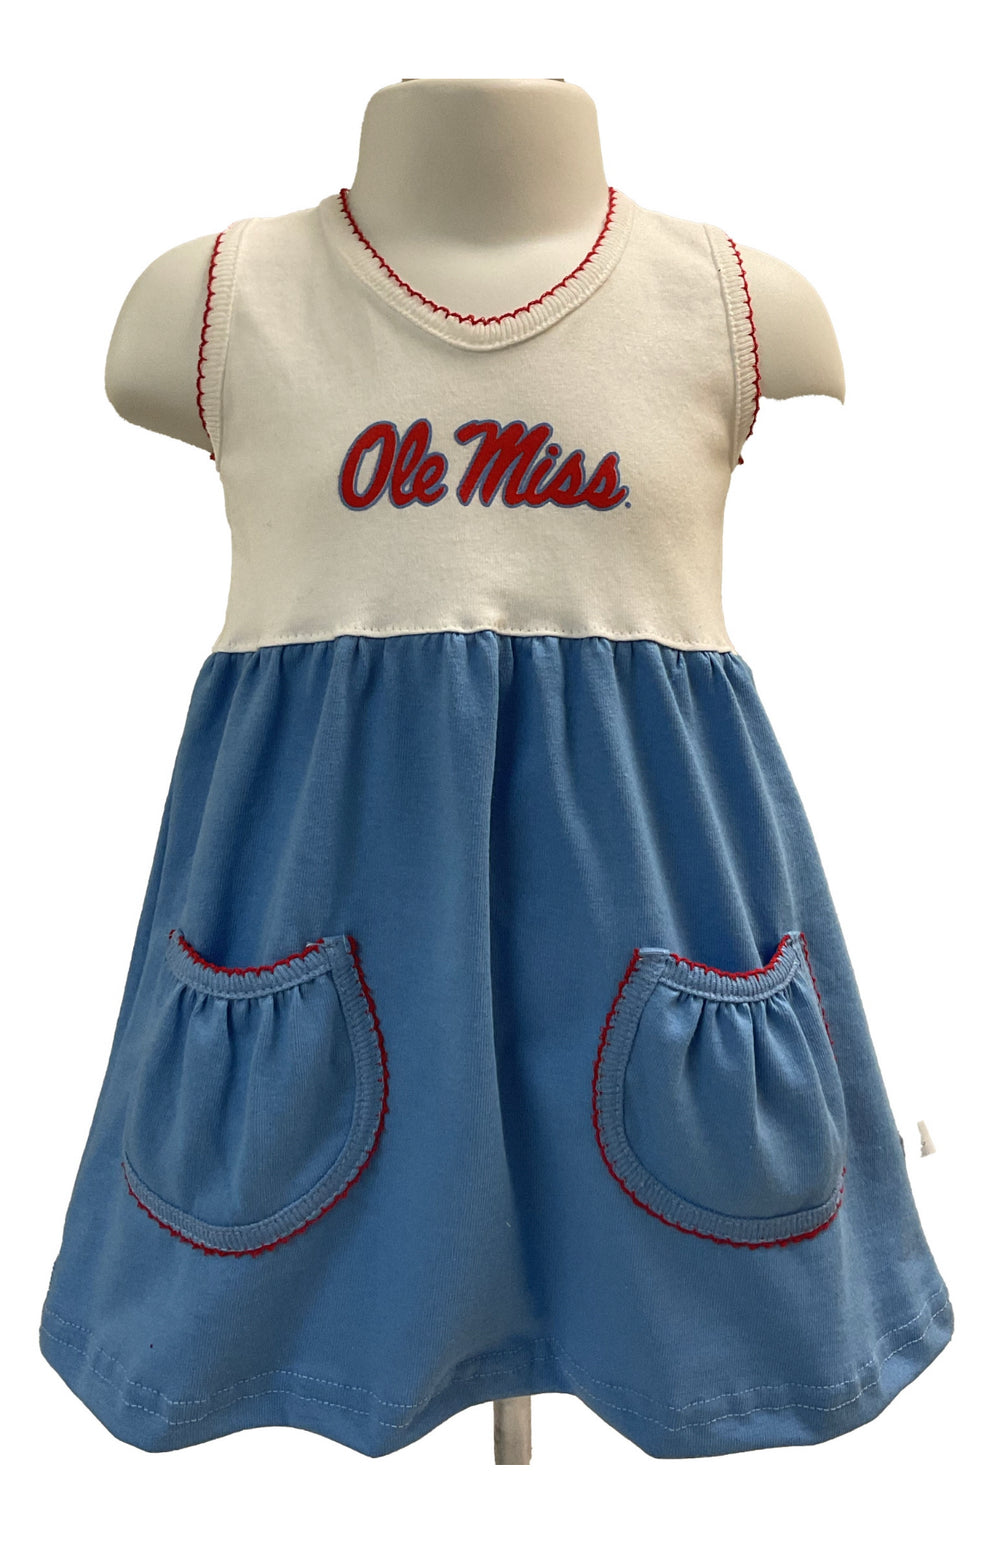 Third Street Ole Miss Toddler Dress with Pockets